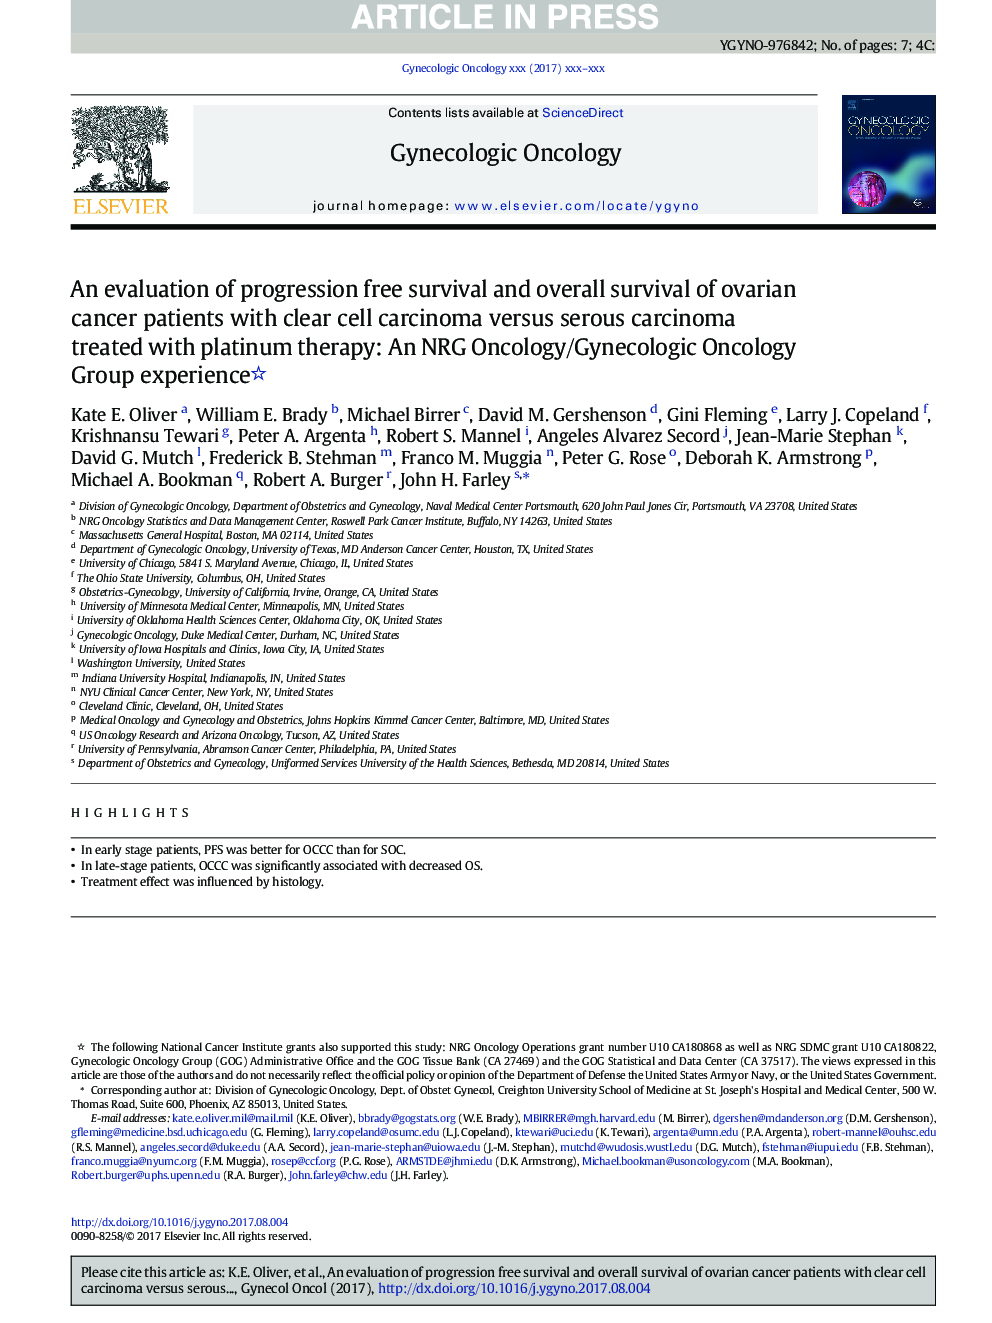 An evaluation of progression free survival and overall survival of ovarian cancer patients with clear cell carcinoma versus serous carcinoma treated with platinum therapy: An NRG Oncology/Gynecologic Oncology Group experience